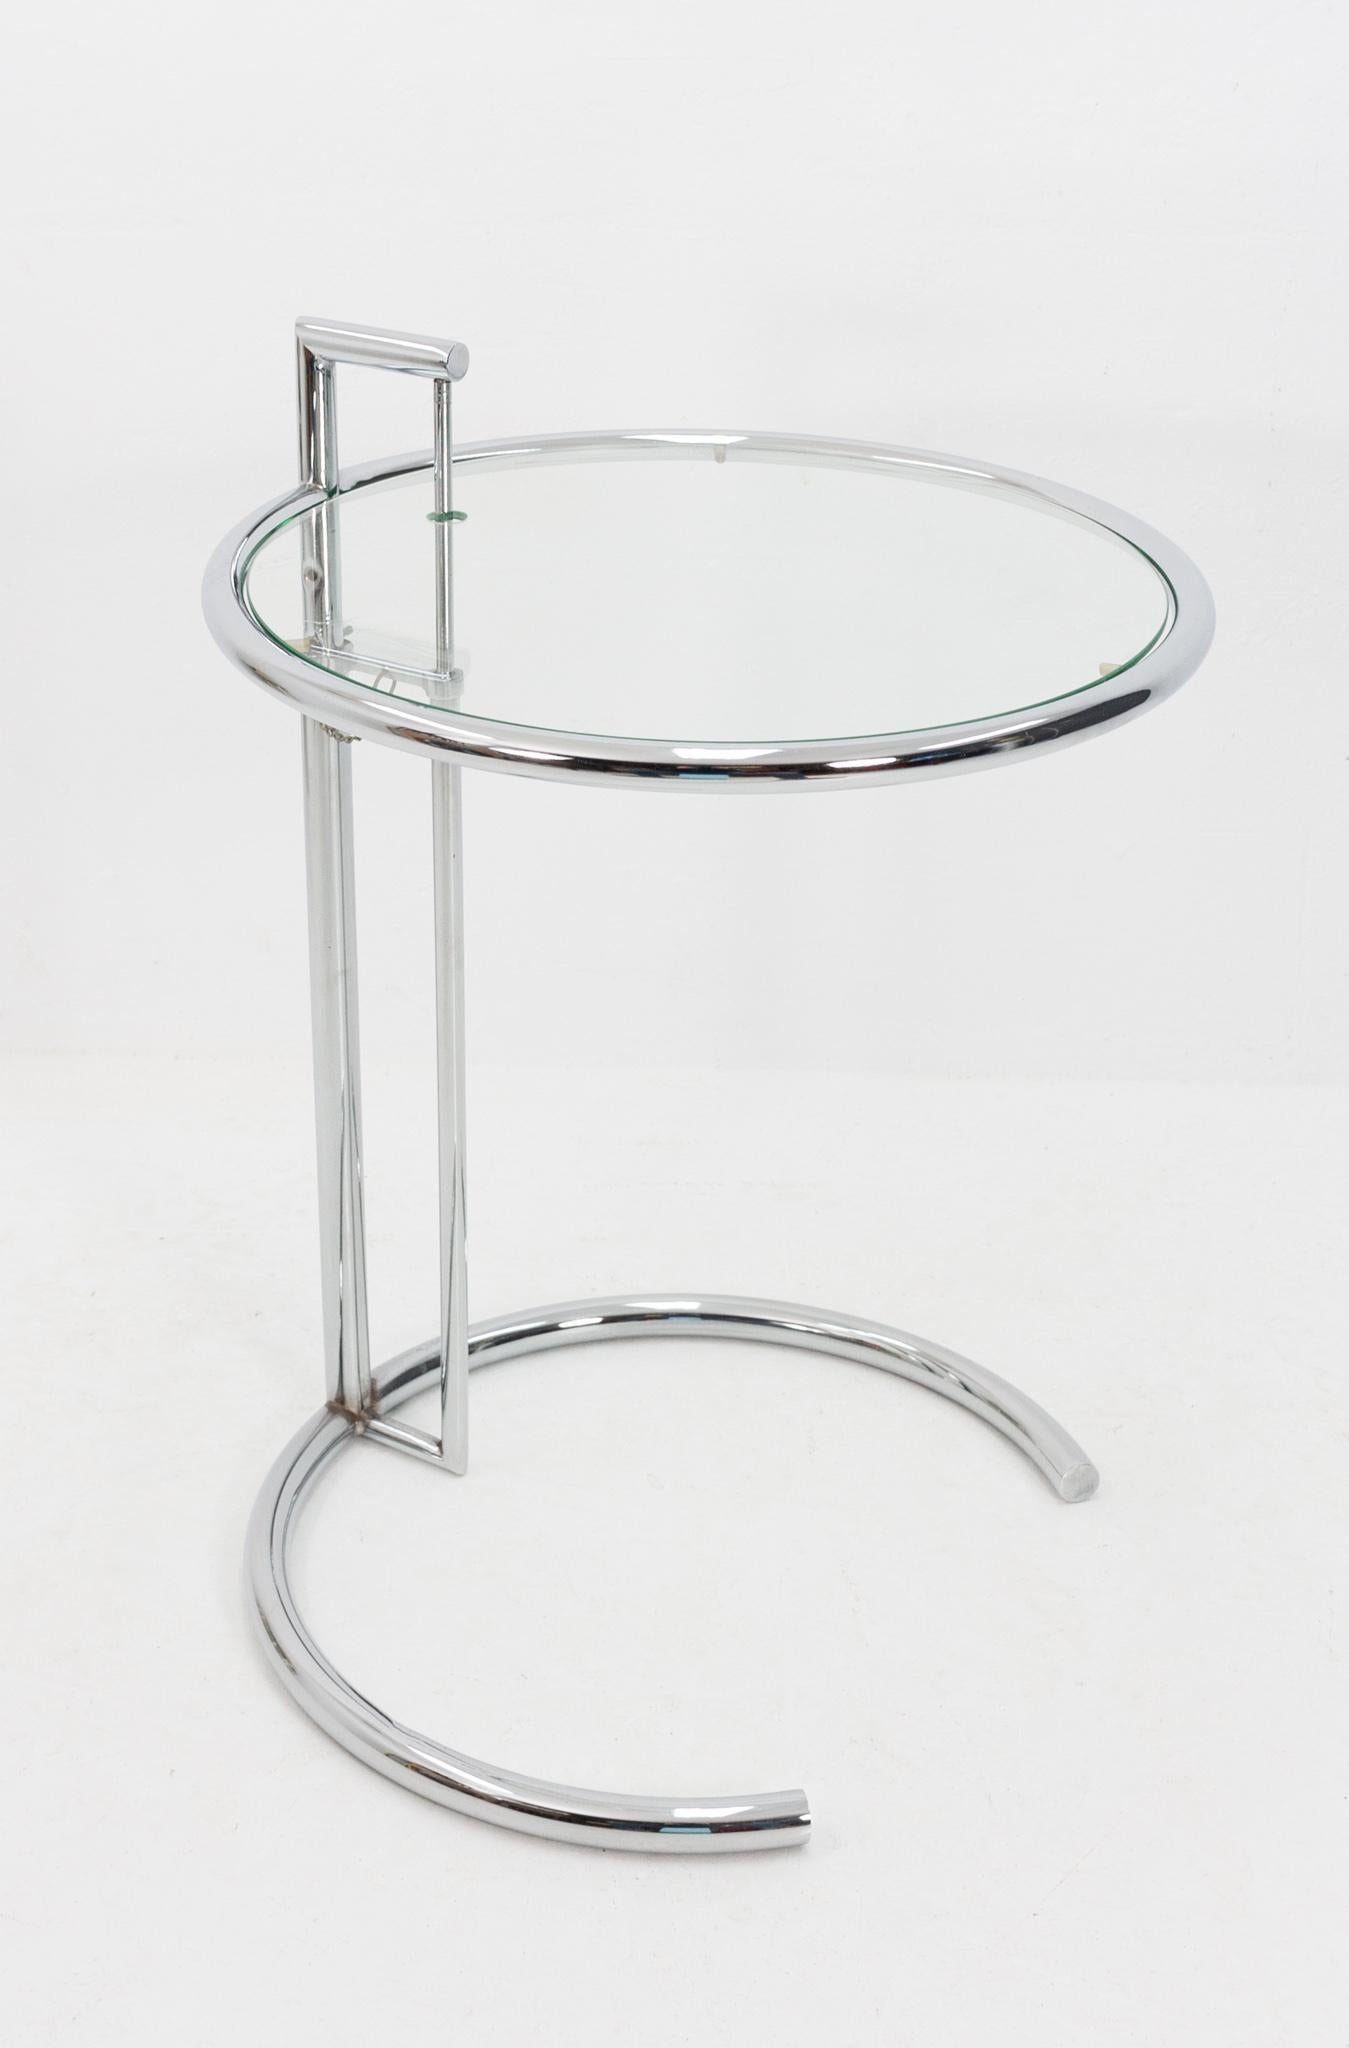 Eileen gray adjustable chrome coffee table E 1027. A real Classic. Good vintage condition.

1970s. No markings. Adjustable in height. 65/94

        